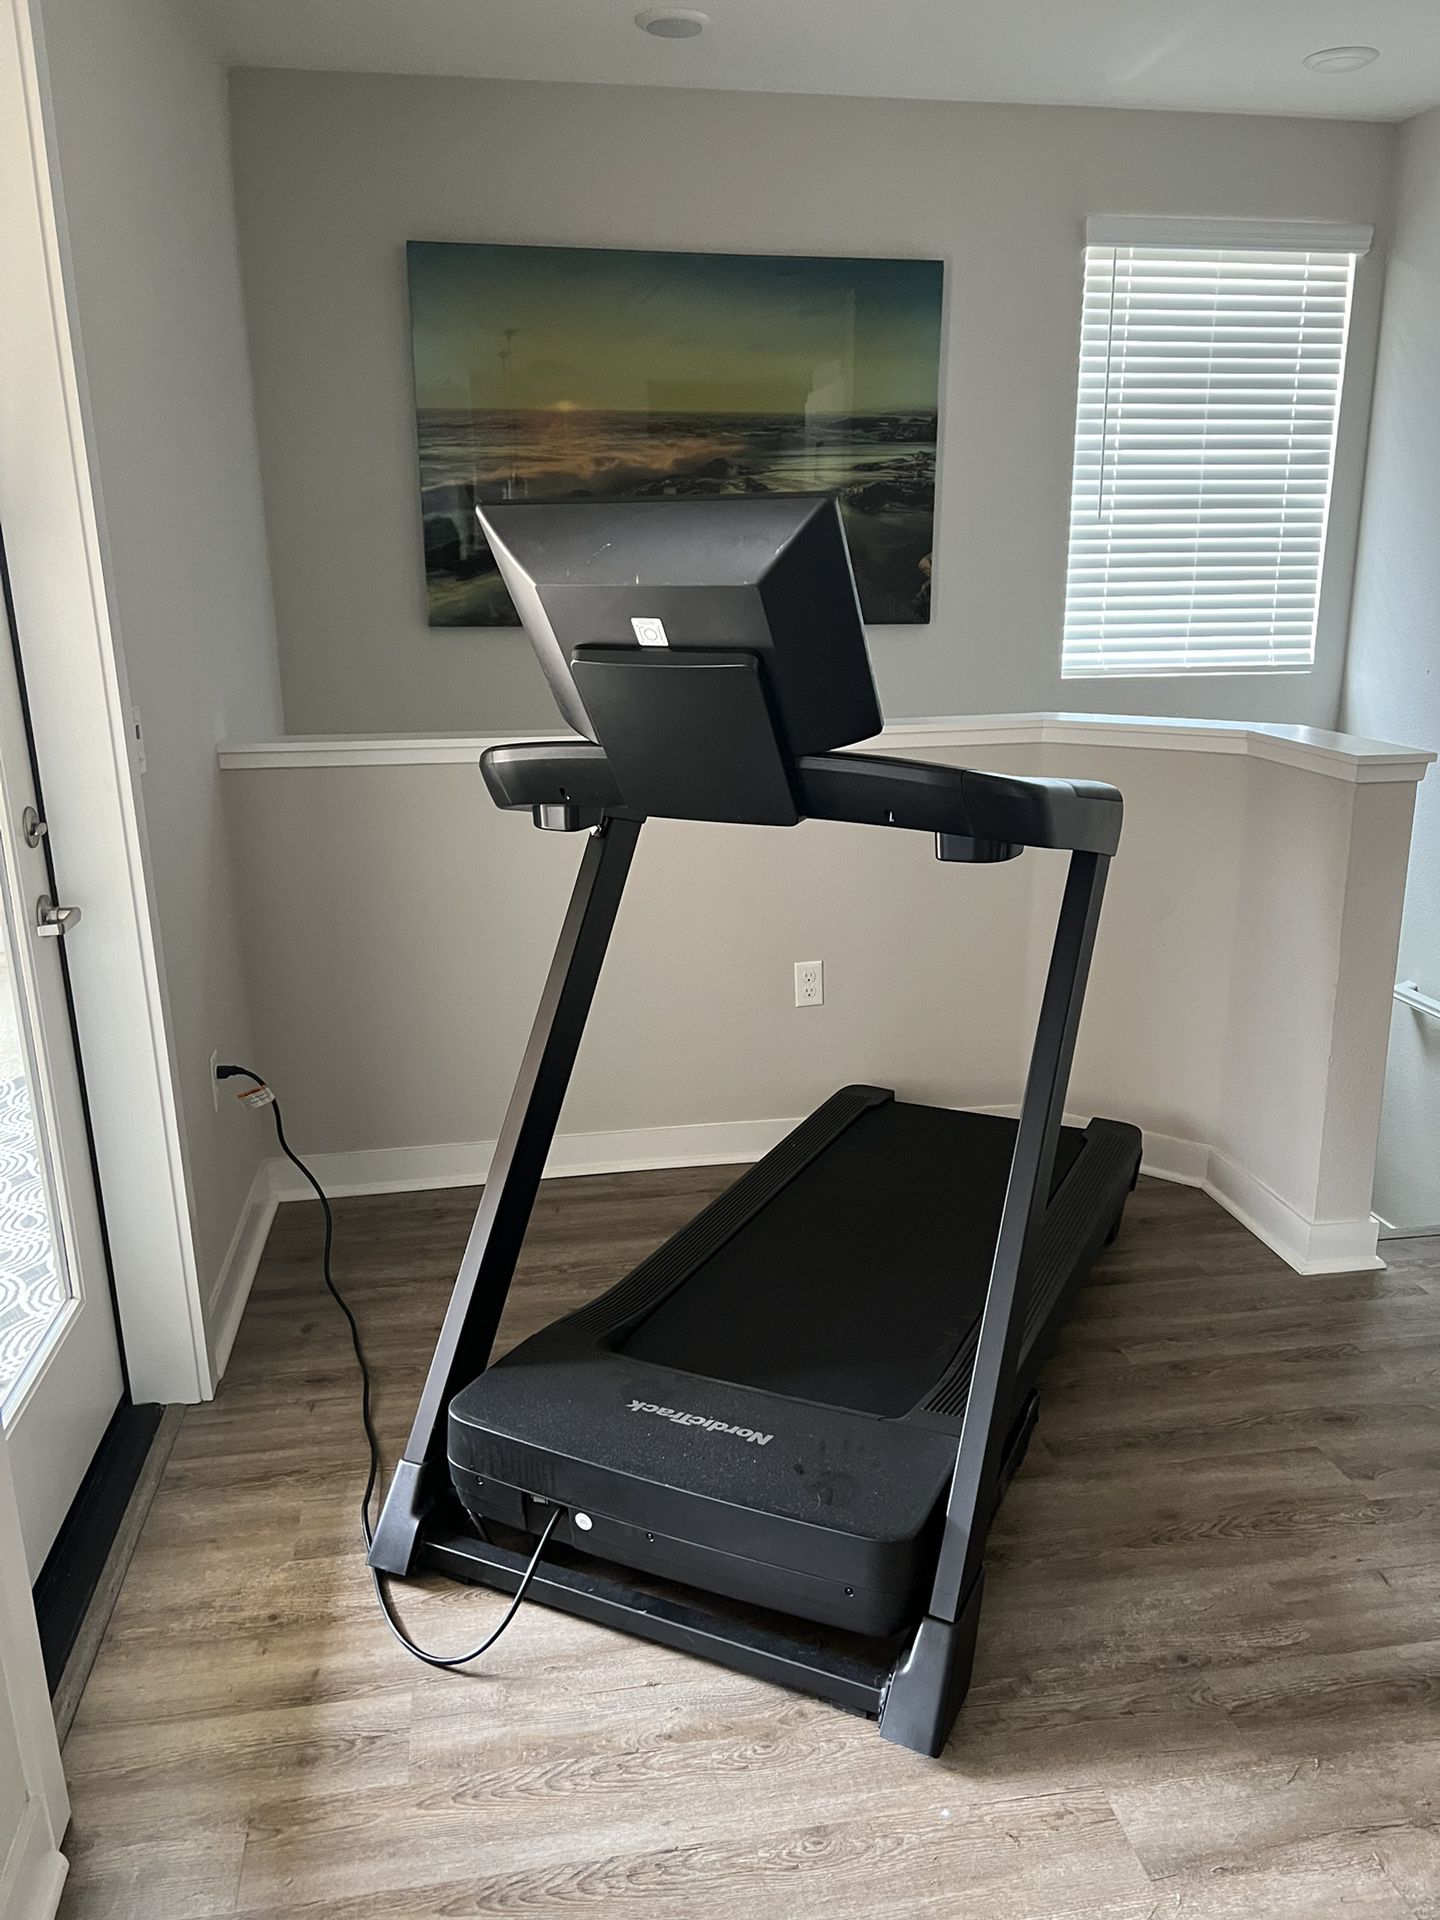 NordicTrack Treadmill  (MOVE OUT SALE)